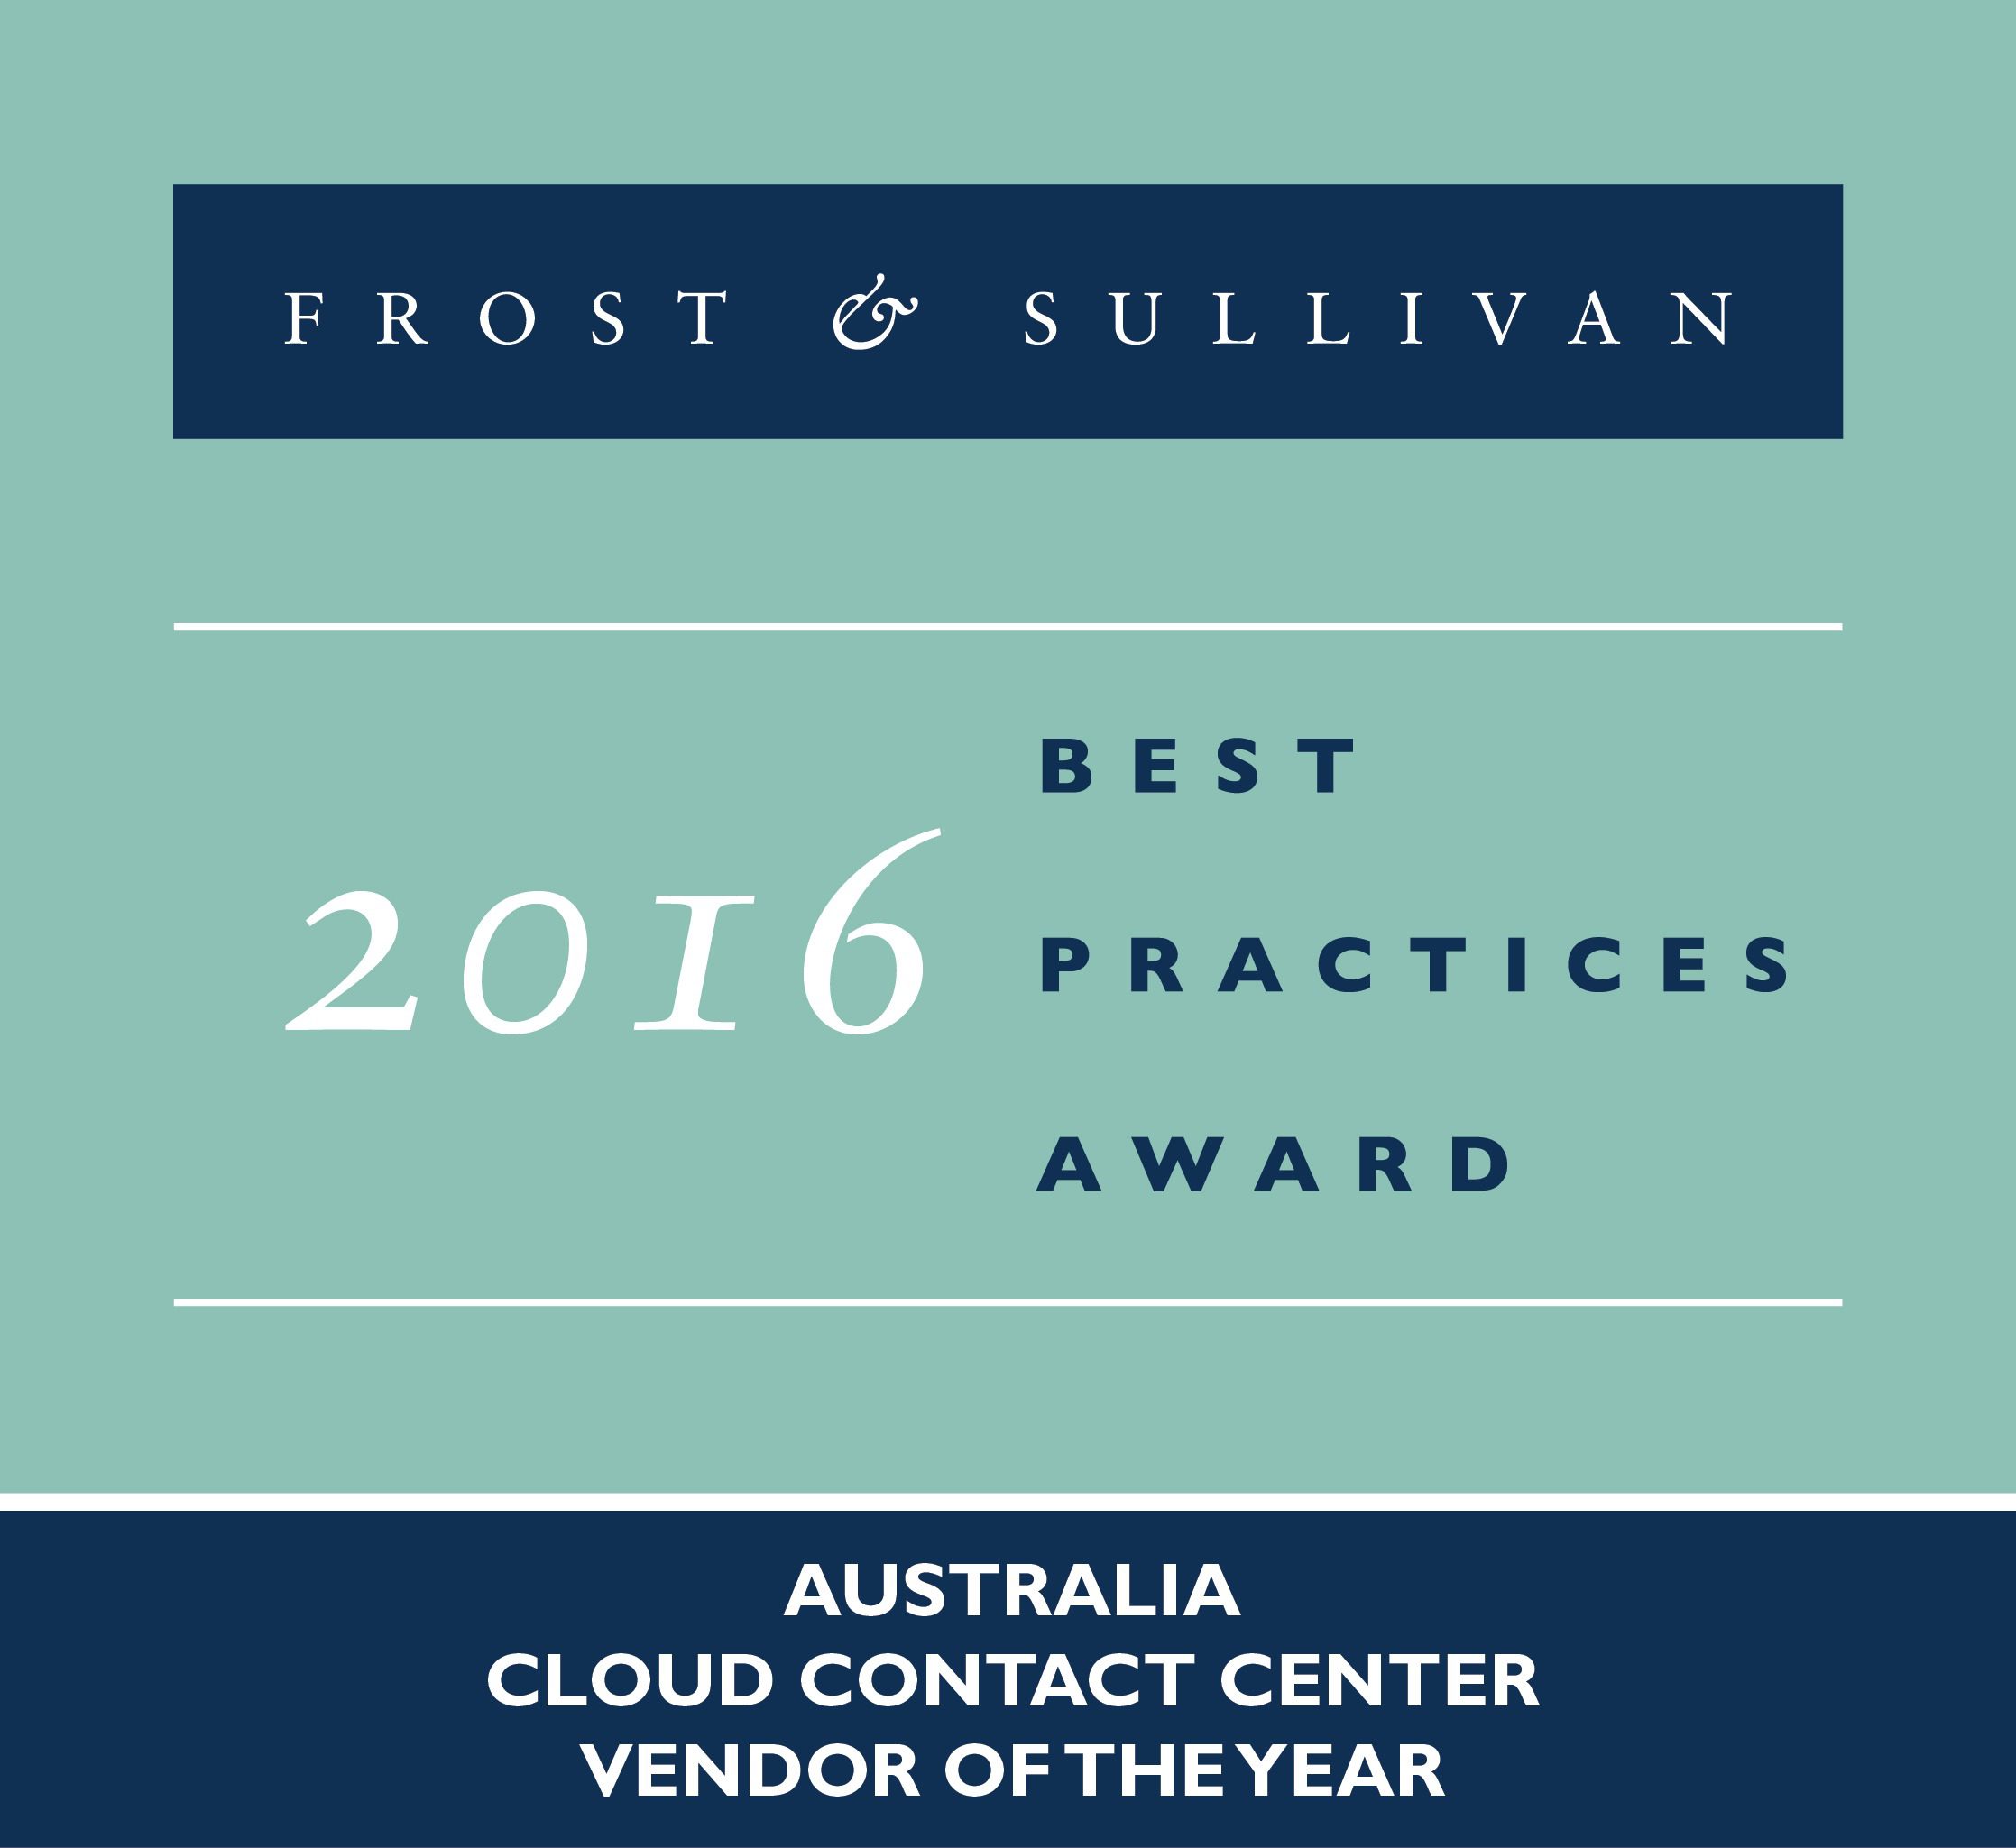 ipSCAPE is the recipient of the 2016 Frost & Sullivan award